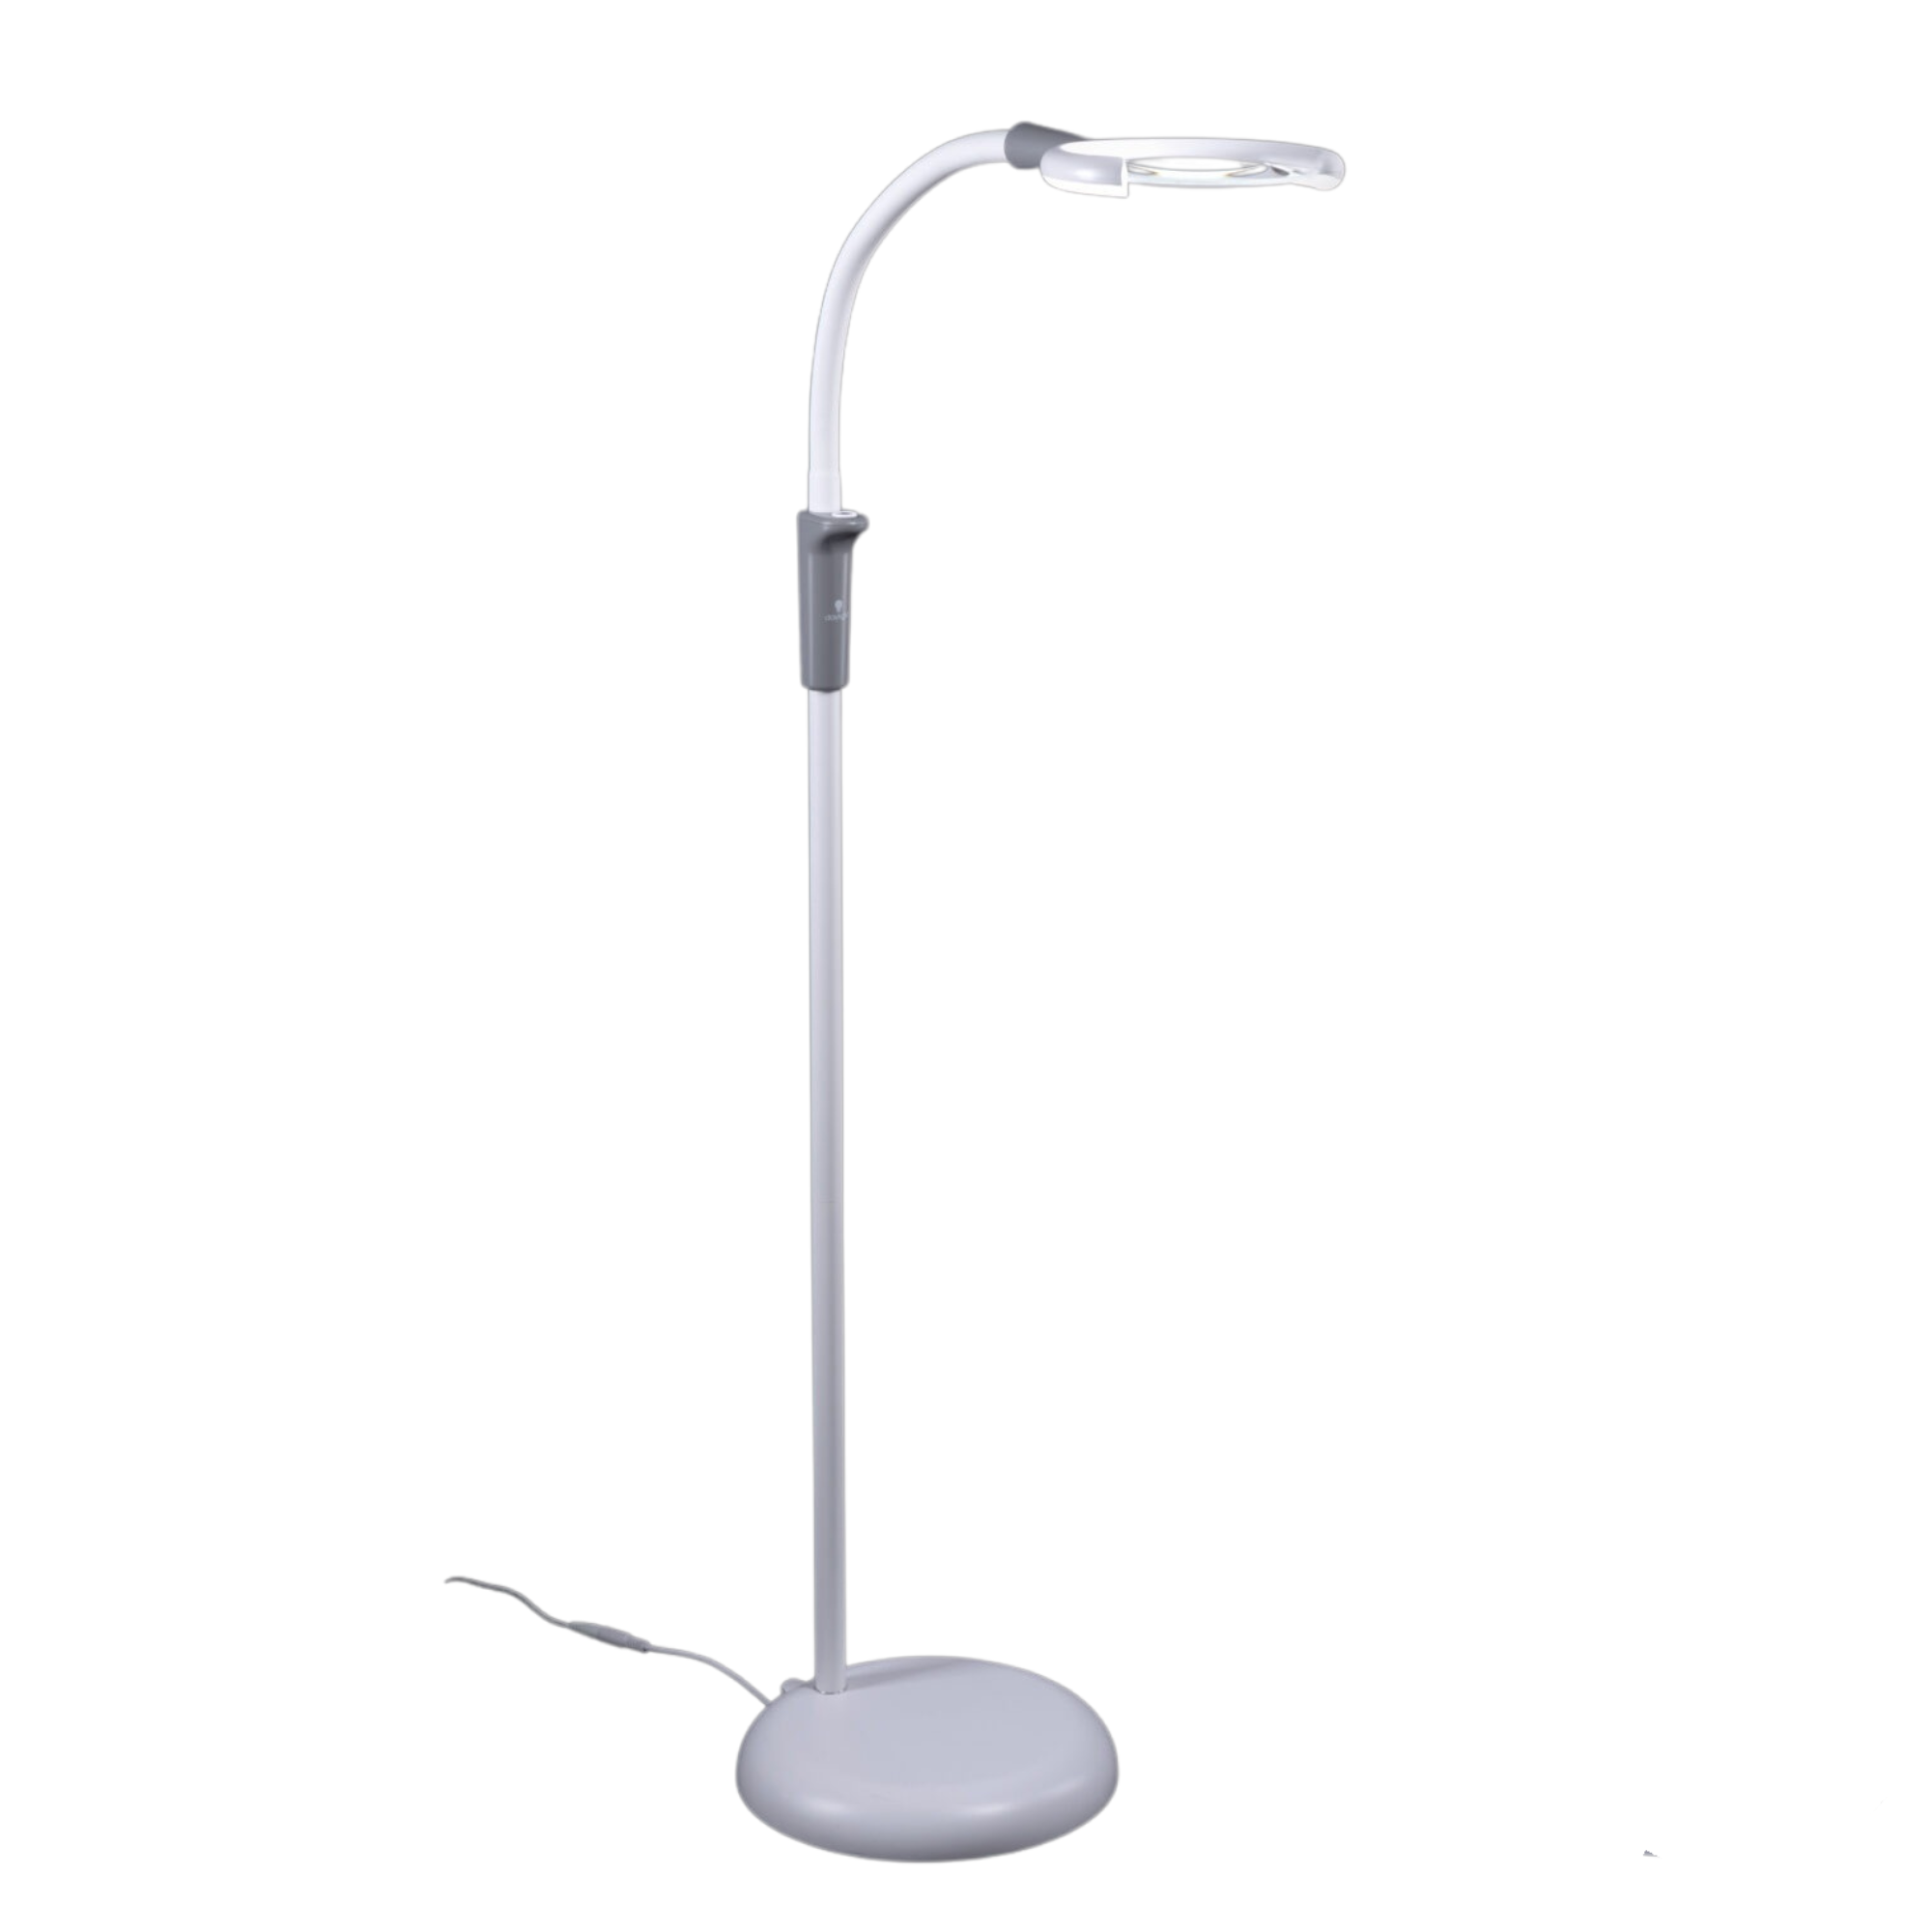 Magnificent Pro lamp with an enlarging glass